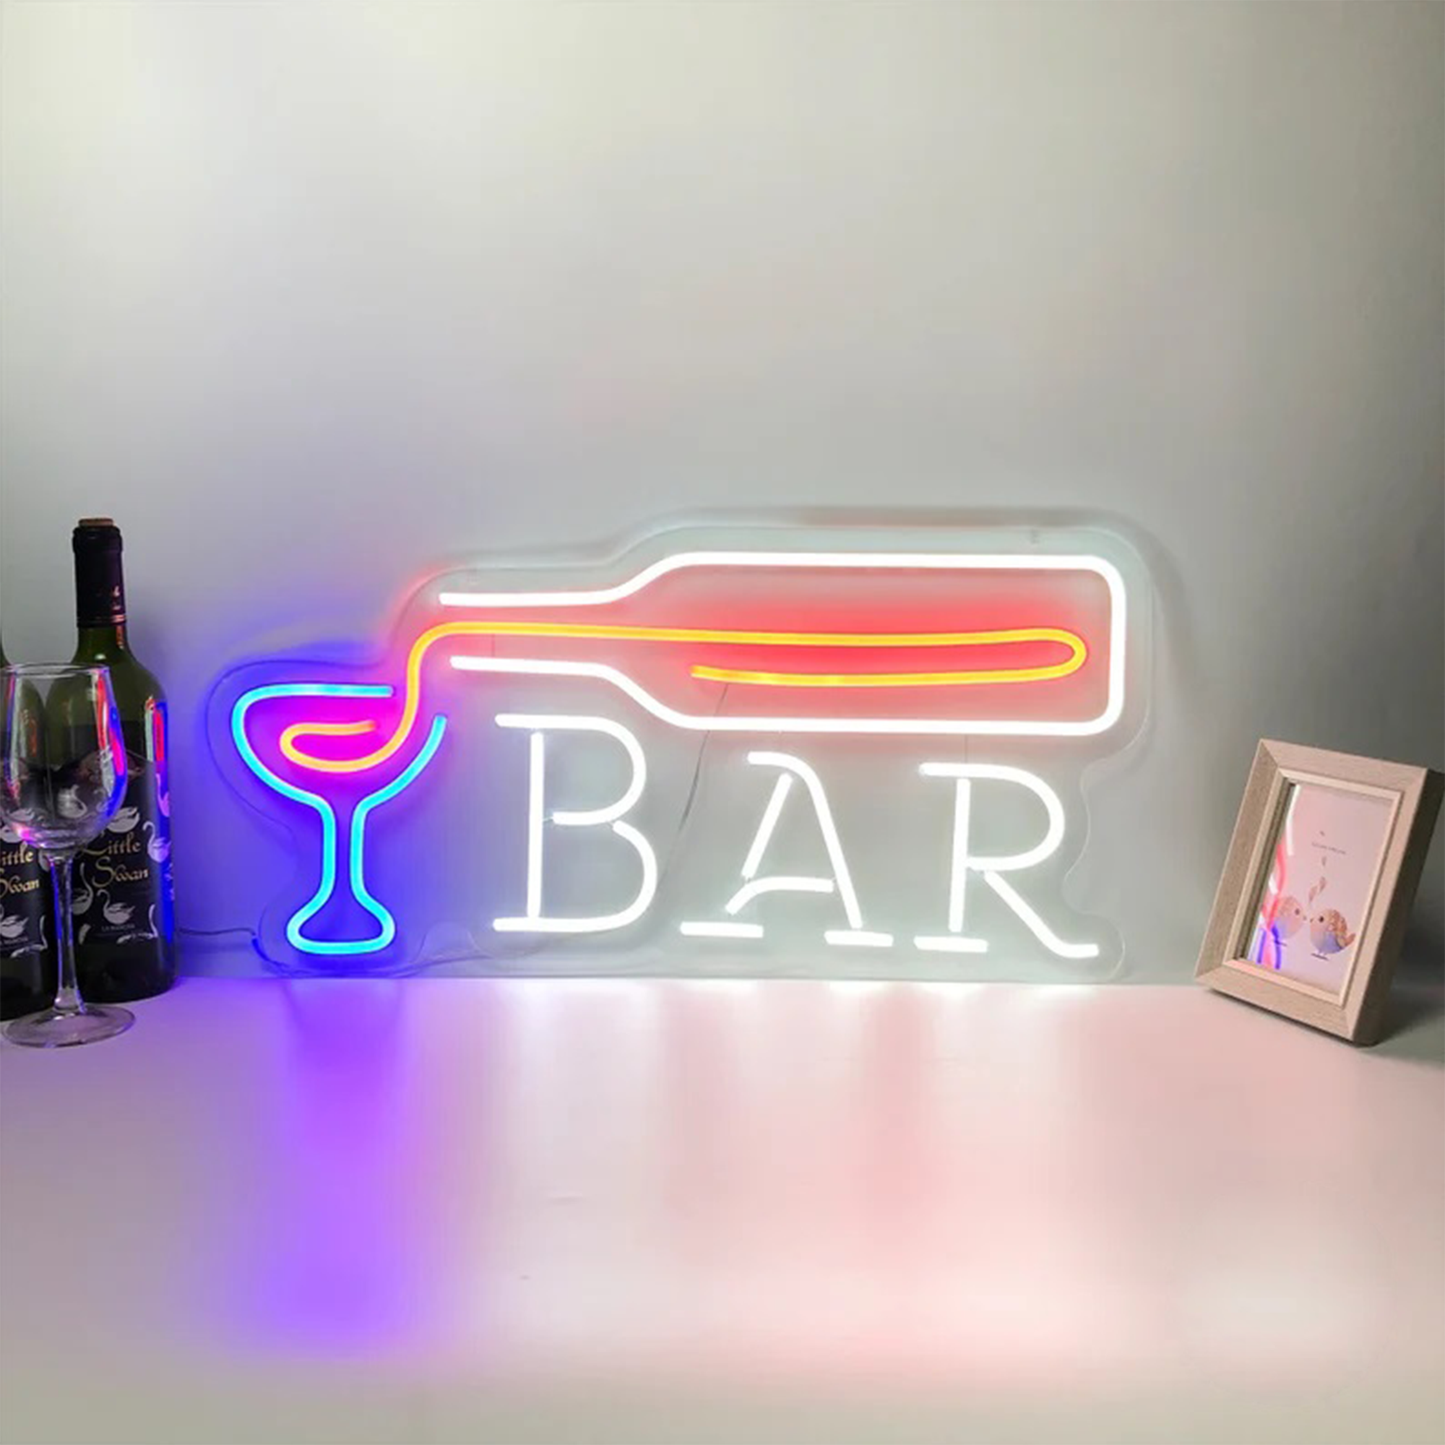 neon-bar-sign-beer-signs-basement-pub-bar-store-signage-business-neon-sign-home-bar-party-decor-led-neon-art-wall-decorations